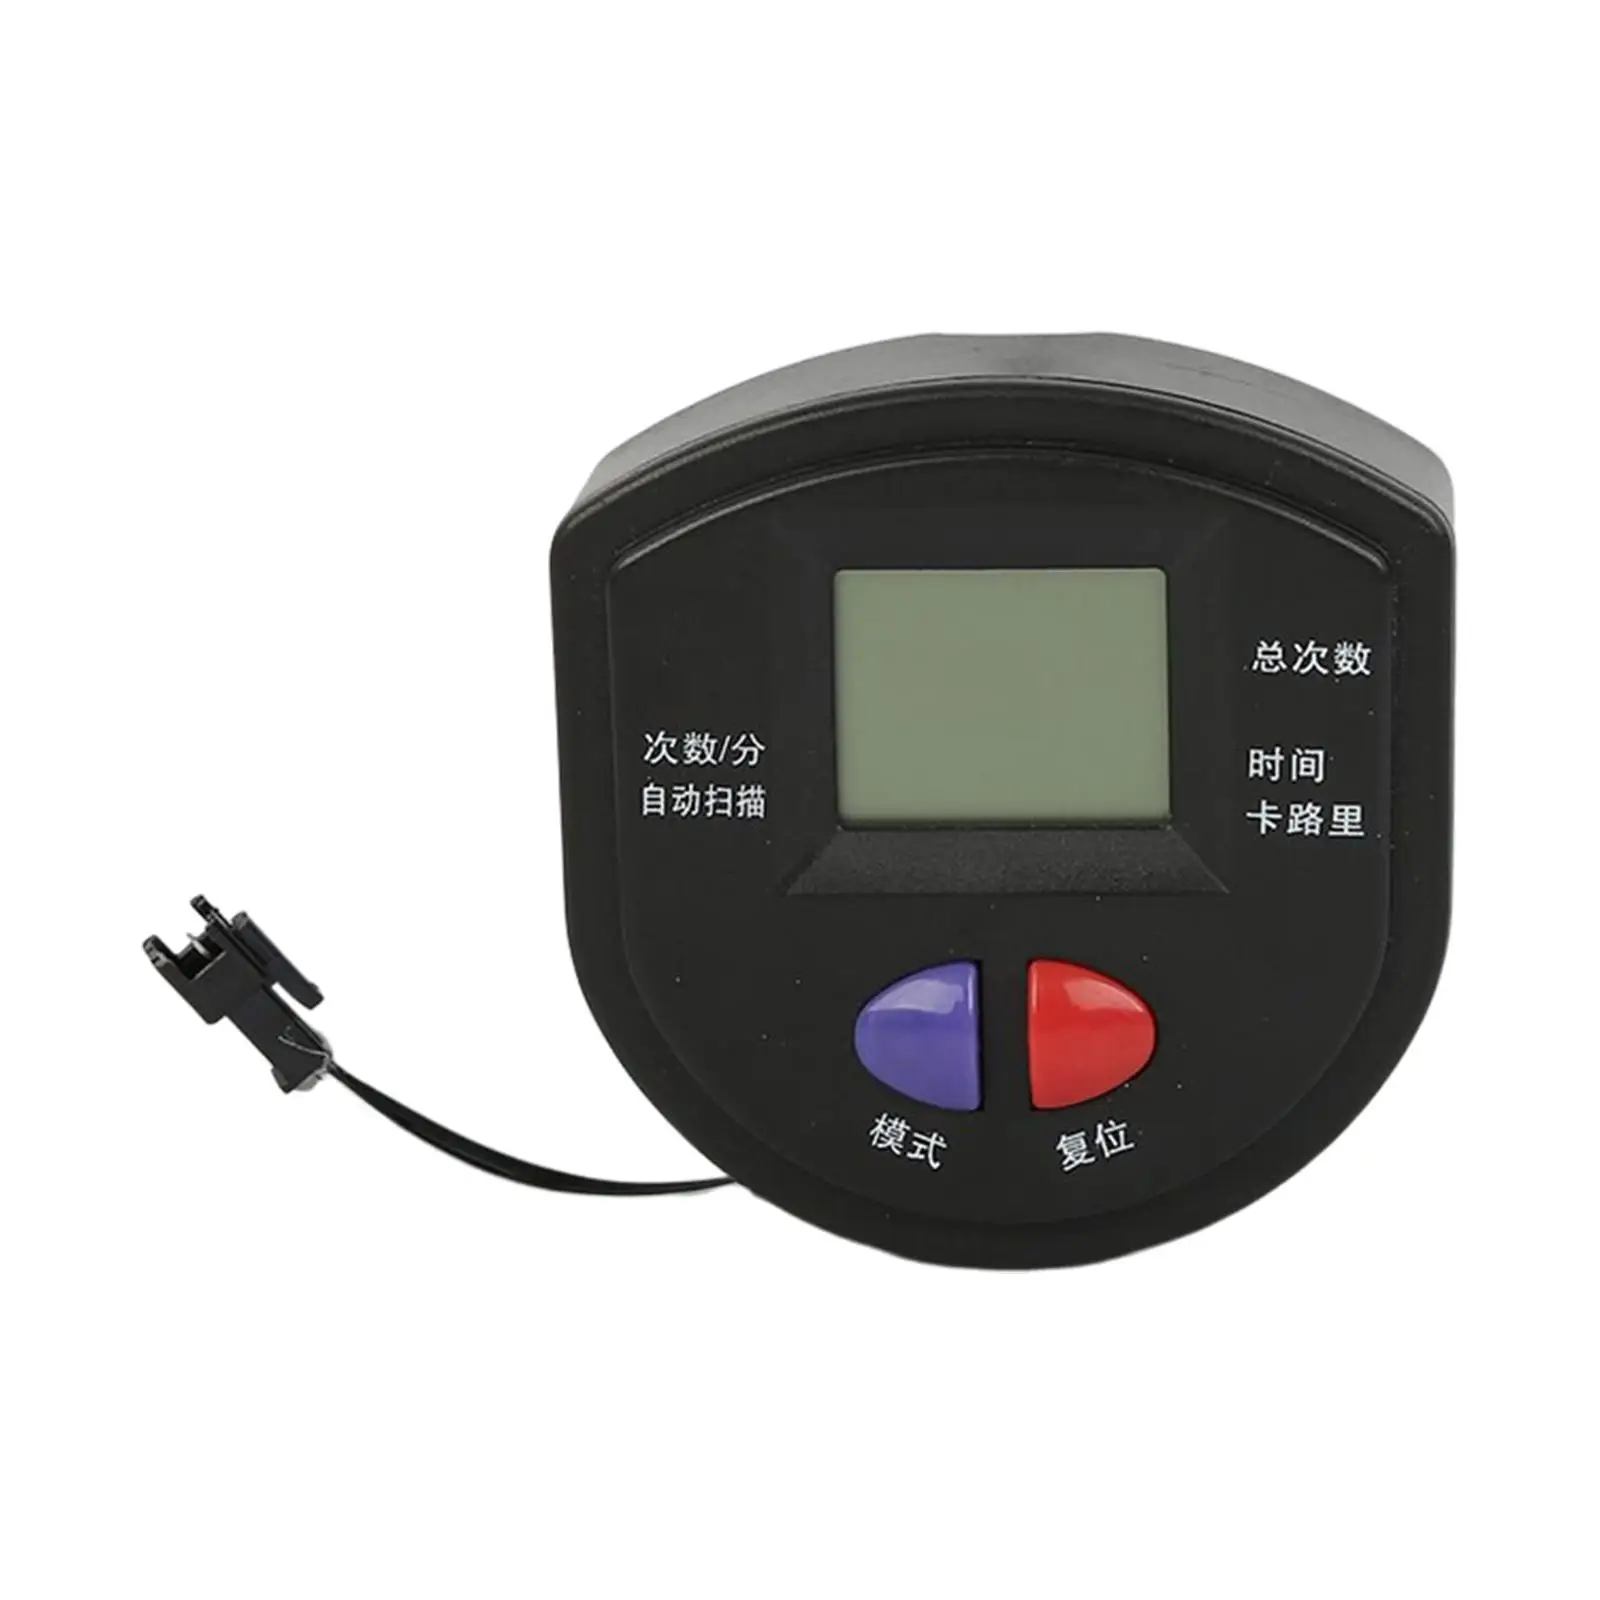 Multipurpose Monitor Speedometer Durable Riding for Riding Machine Counter